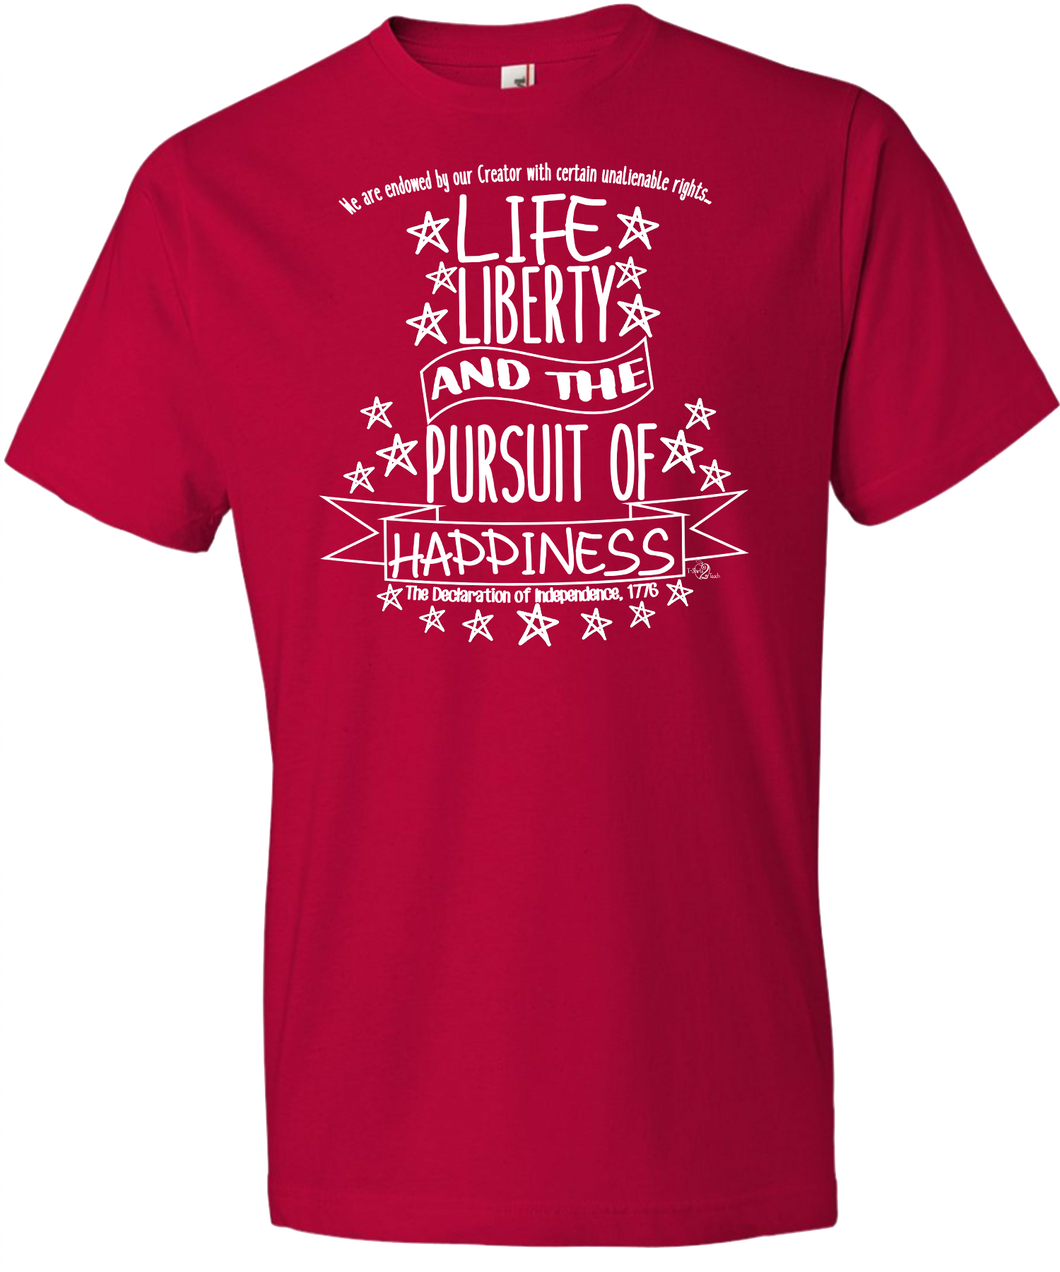 Life, Liberty, And The Pursuit Of Happiness Tee (ONLY Size Small, Large, 3X)